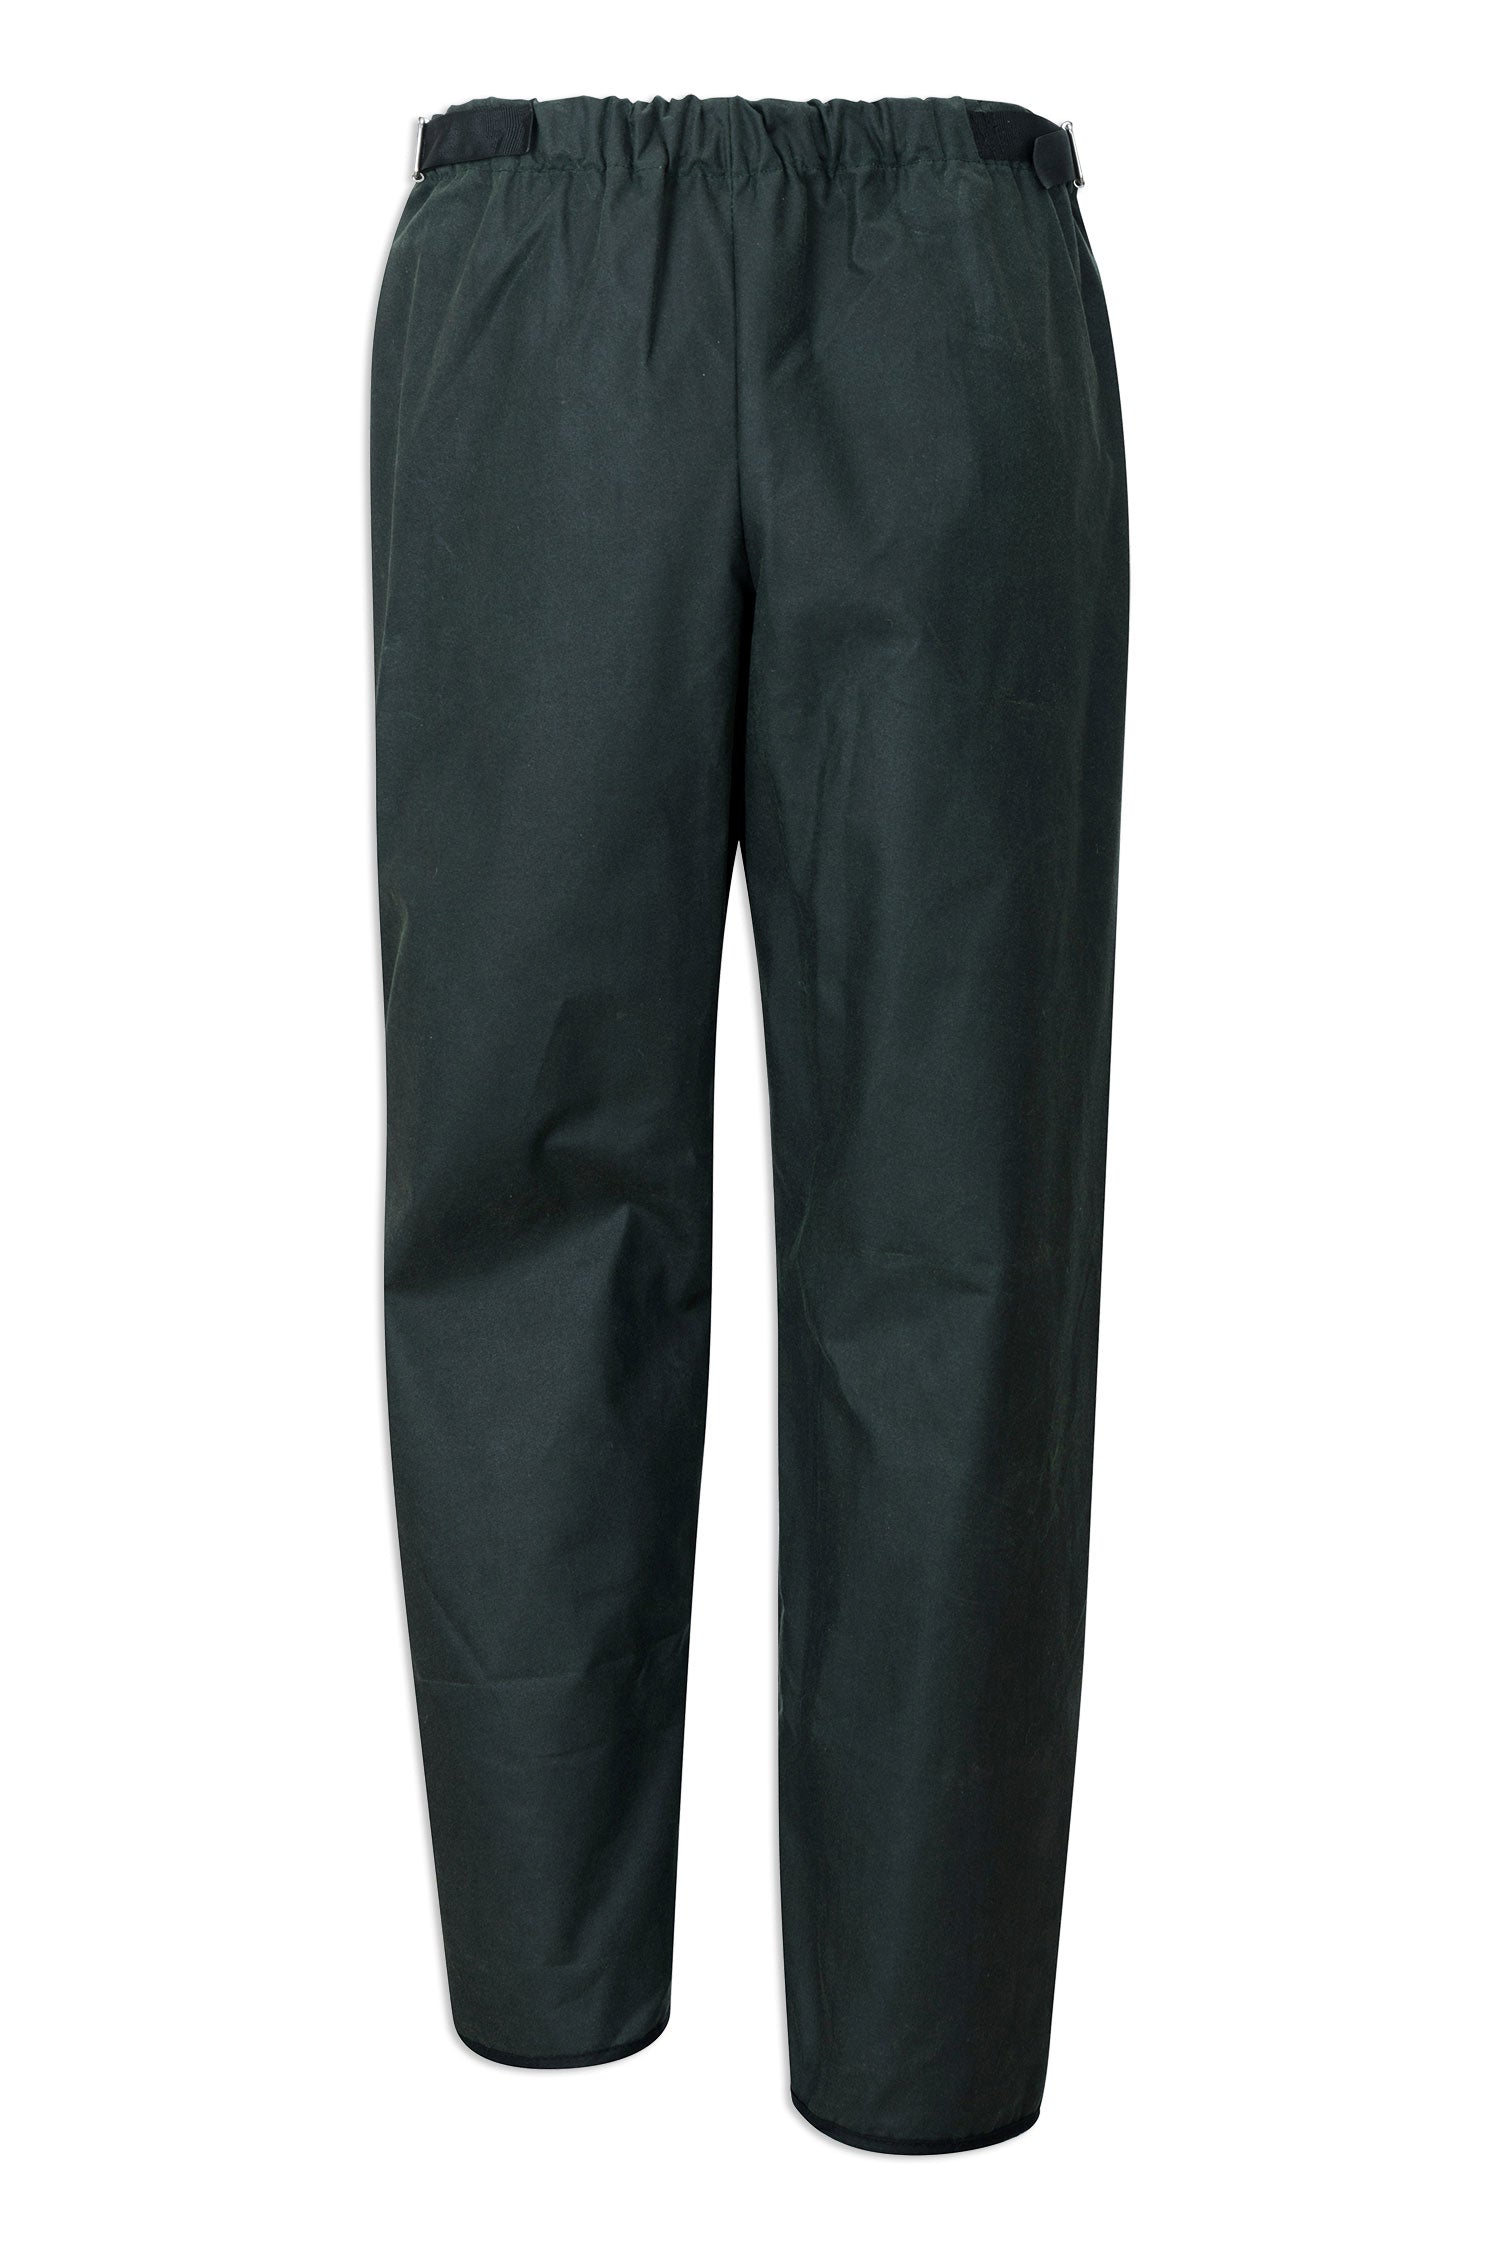 Green Hoggs Waxed Cotton Over Trousers